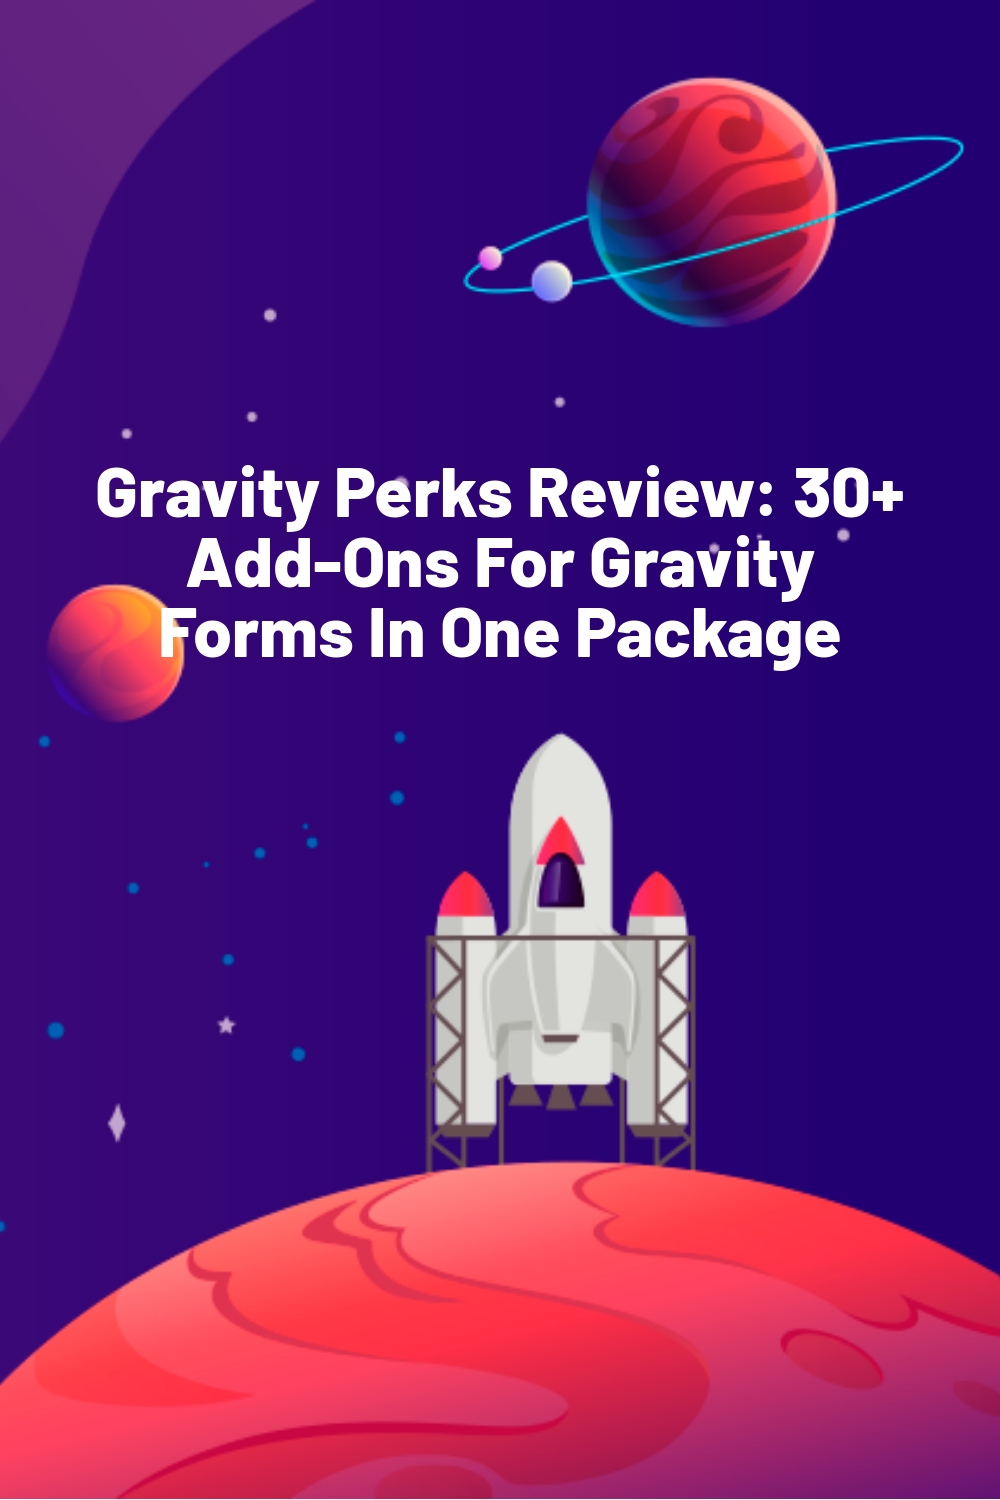 Gravity Perks Review: 30+ Add-Ons For Gravity Forms In One Package